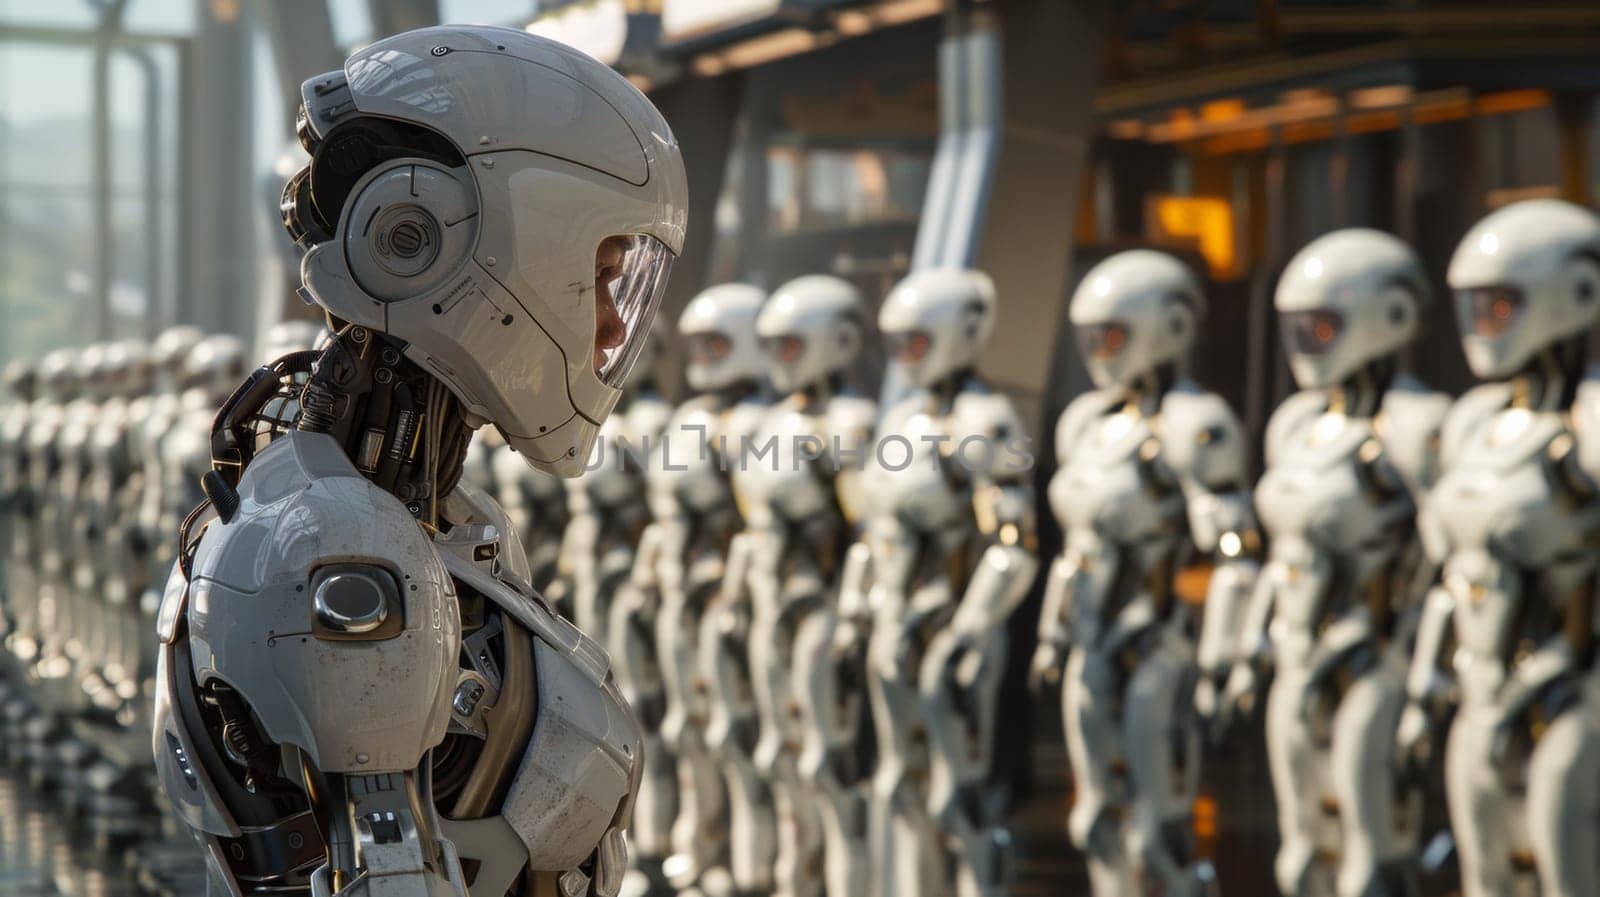 A man in a white suit standing next to rows of robots